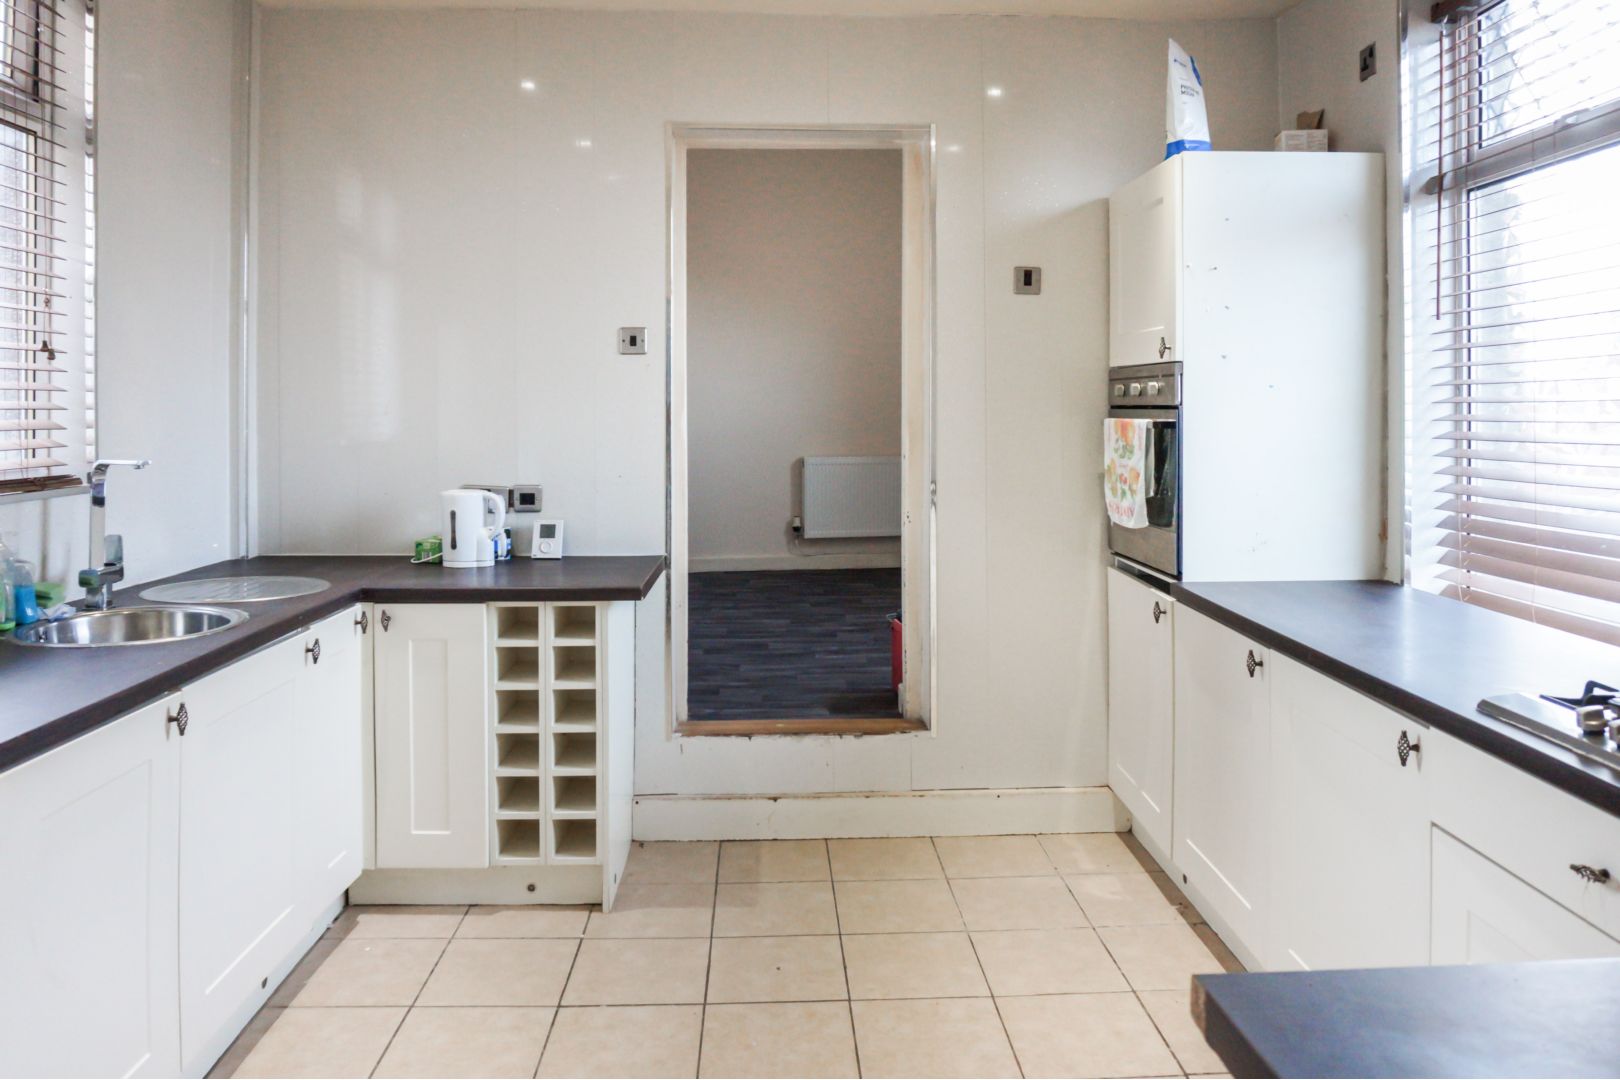 3 to 5 Bed HMO Conversion - Propertunities (10)